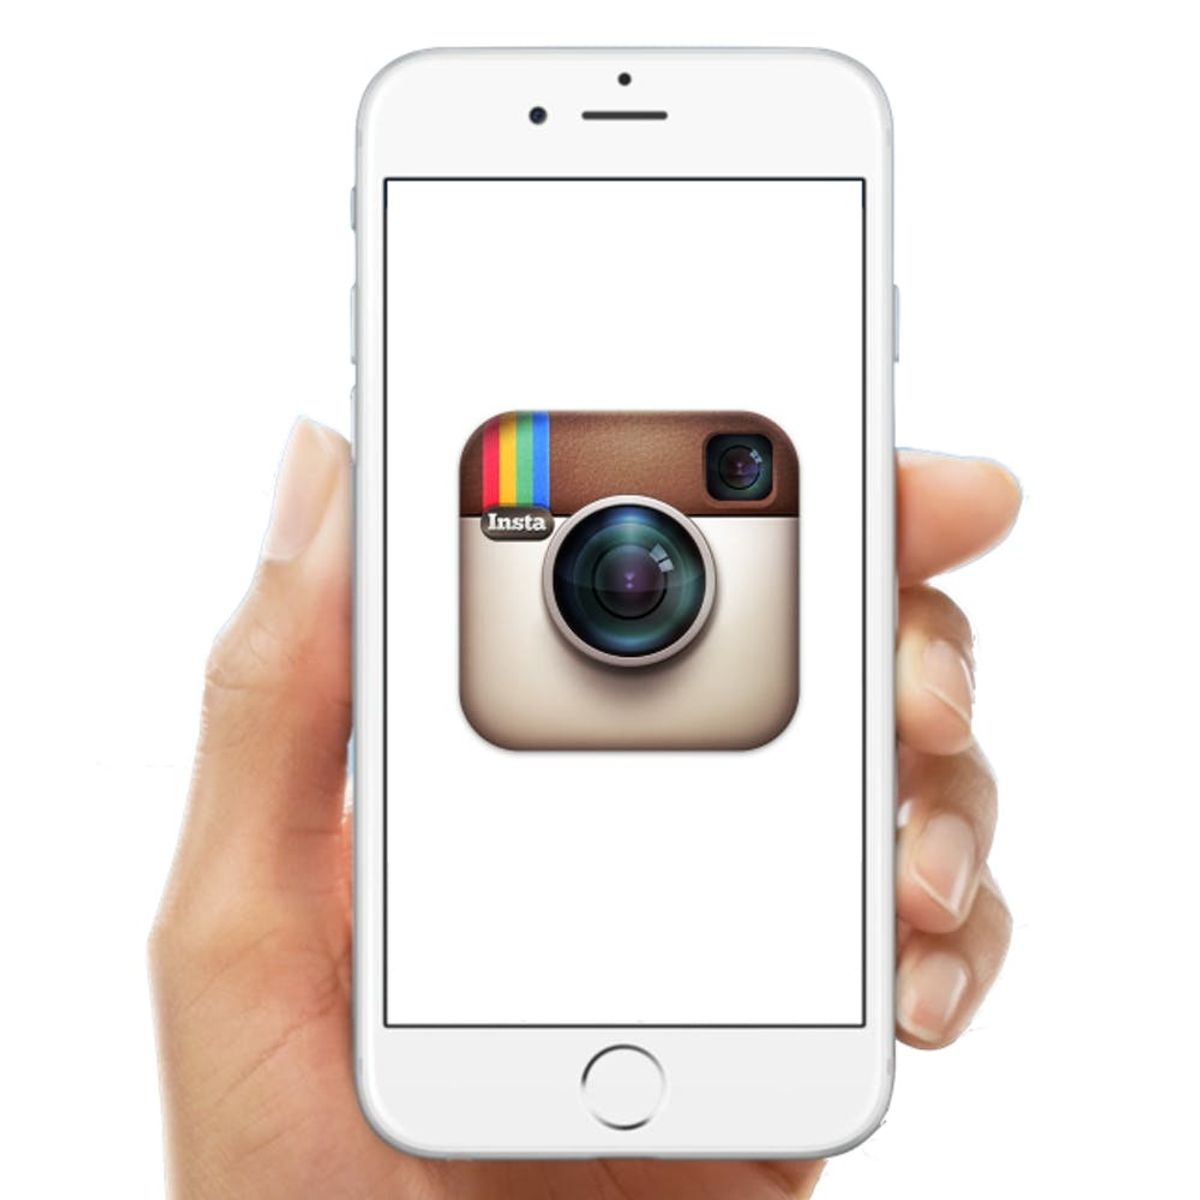 Instagram’s New Update Will Make Your Life SO Much Easier